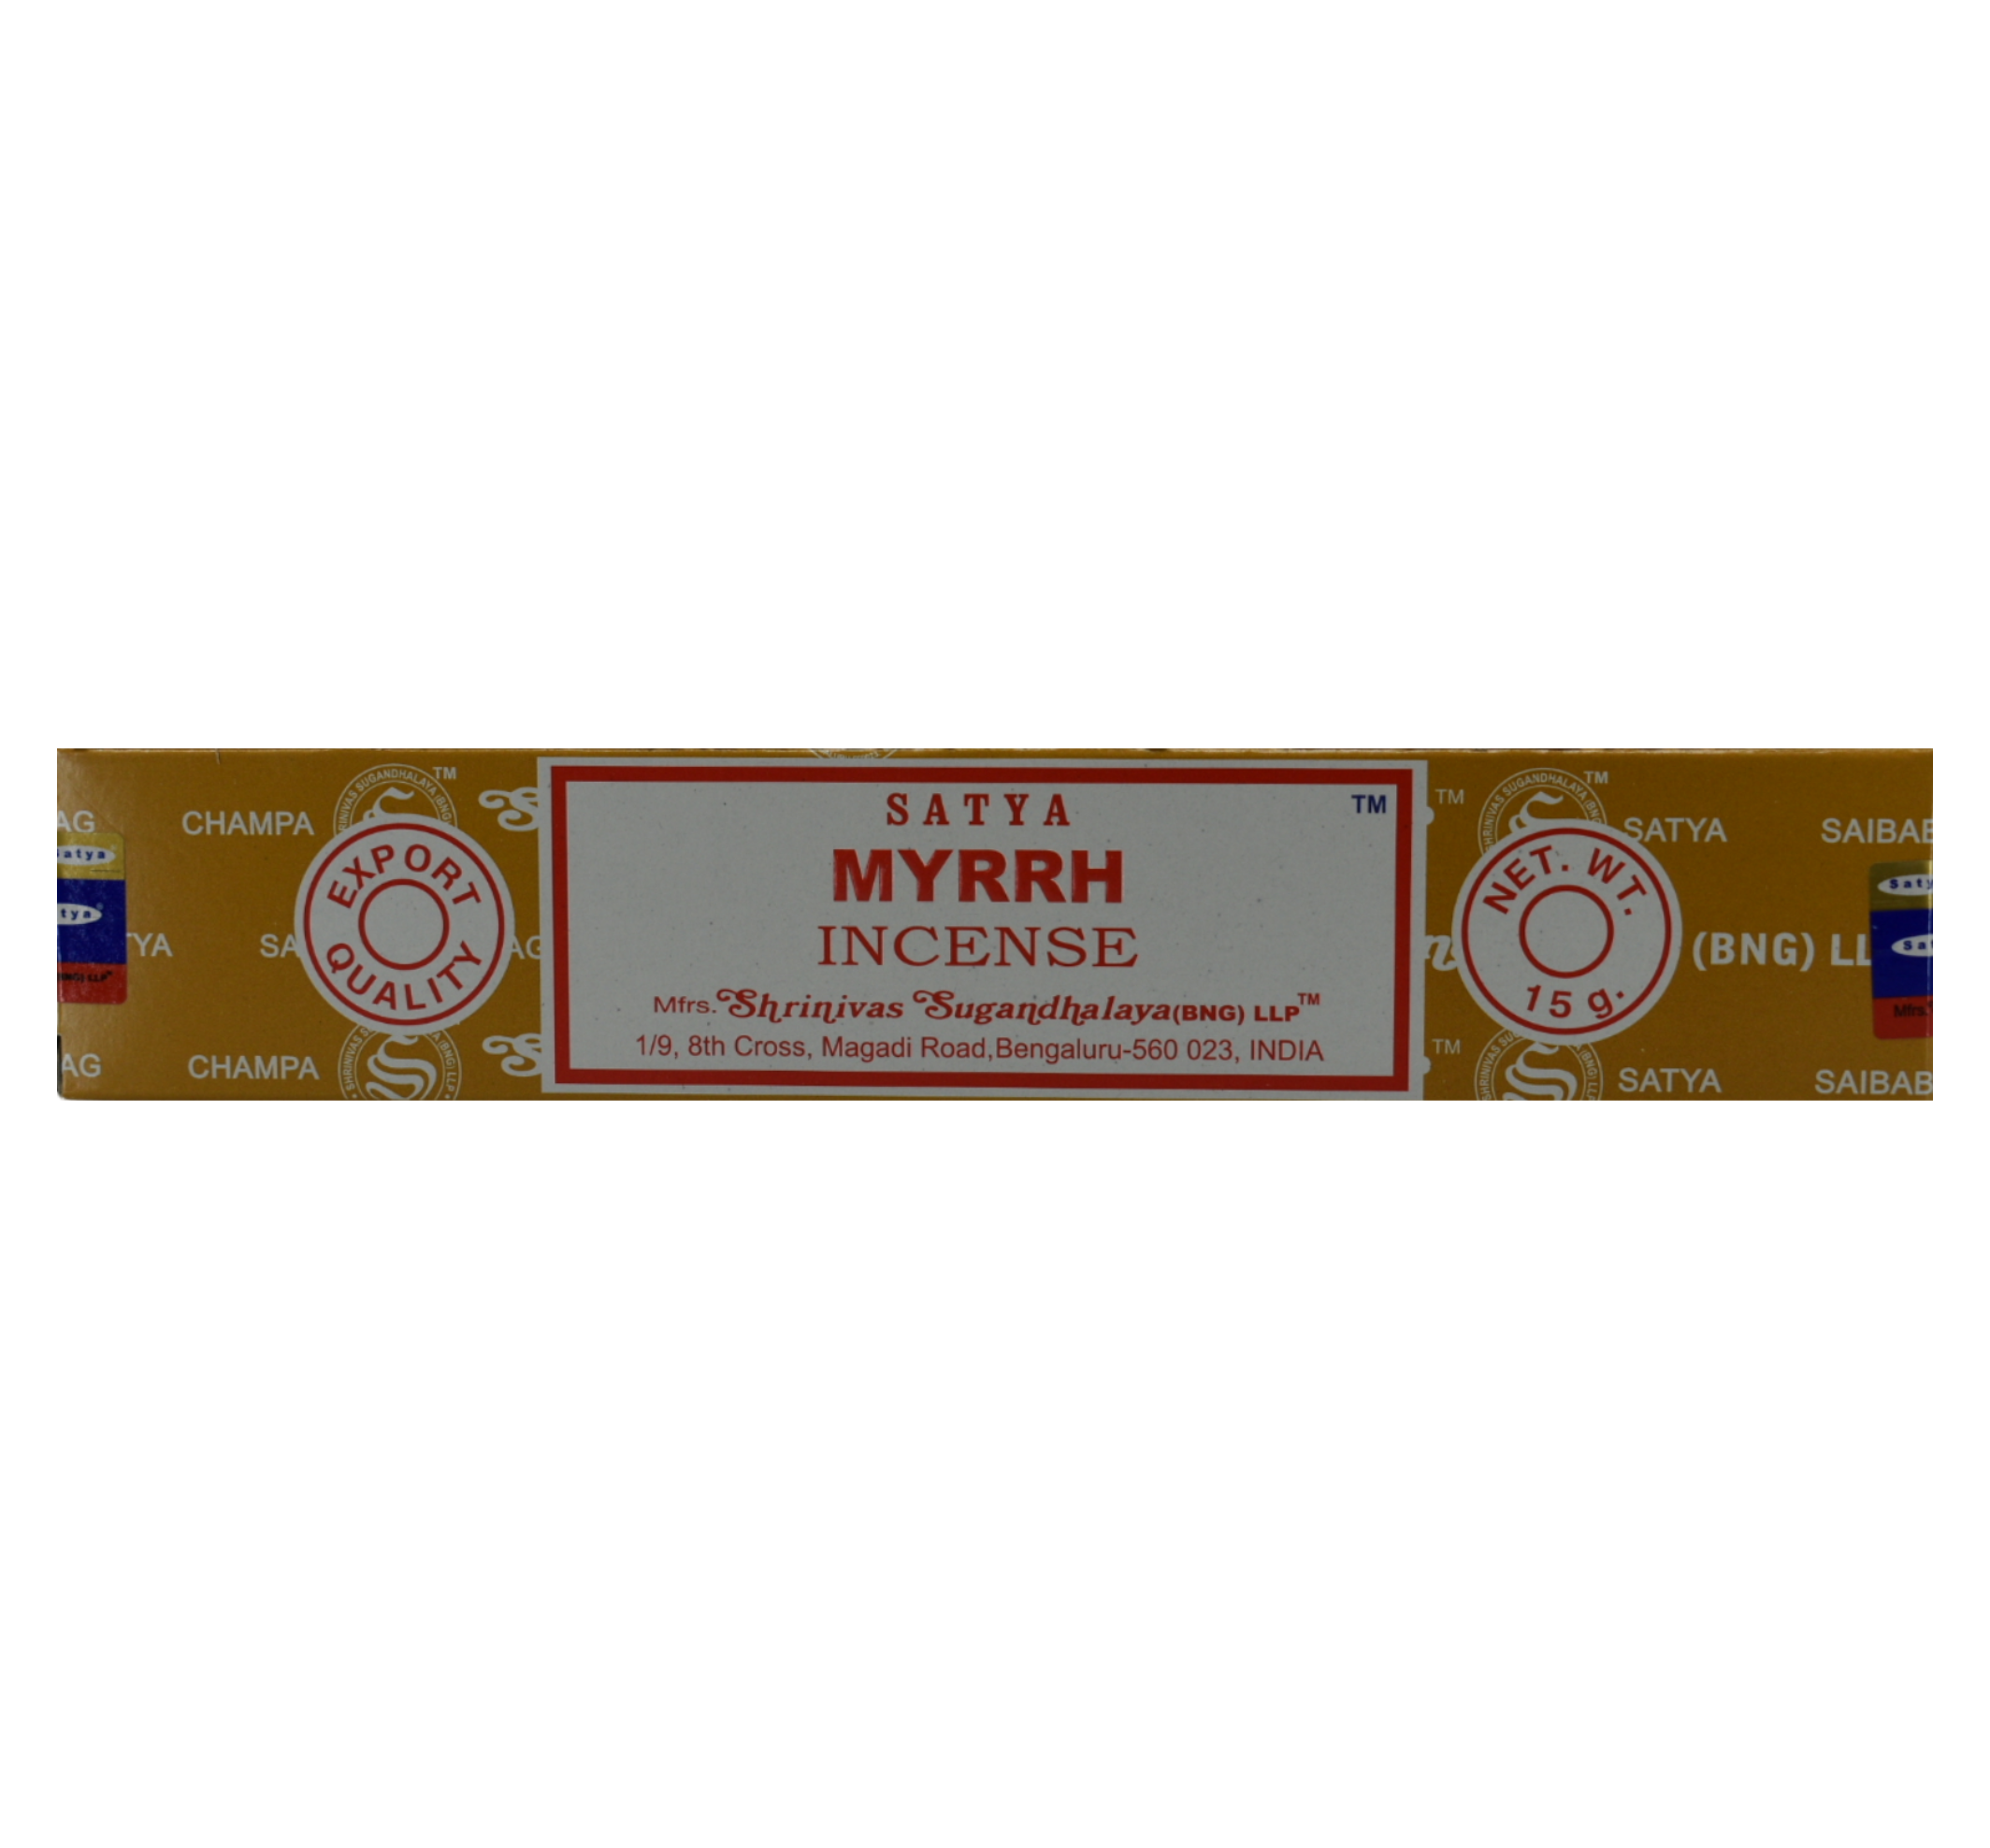 Myrrh Incense Sticks. Box is caramel colored with white lines that have company words as a design. The center of the box has a white rectangle with a red frame within the border. In the rectangle the top line has the company name. The next rows have the title Myrrh Incense. At the bottom of the rectangle is the manufacturer&